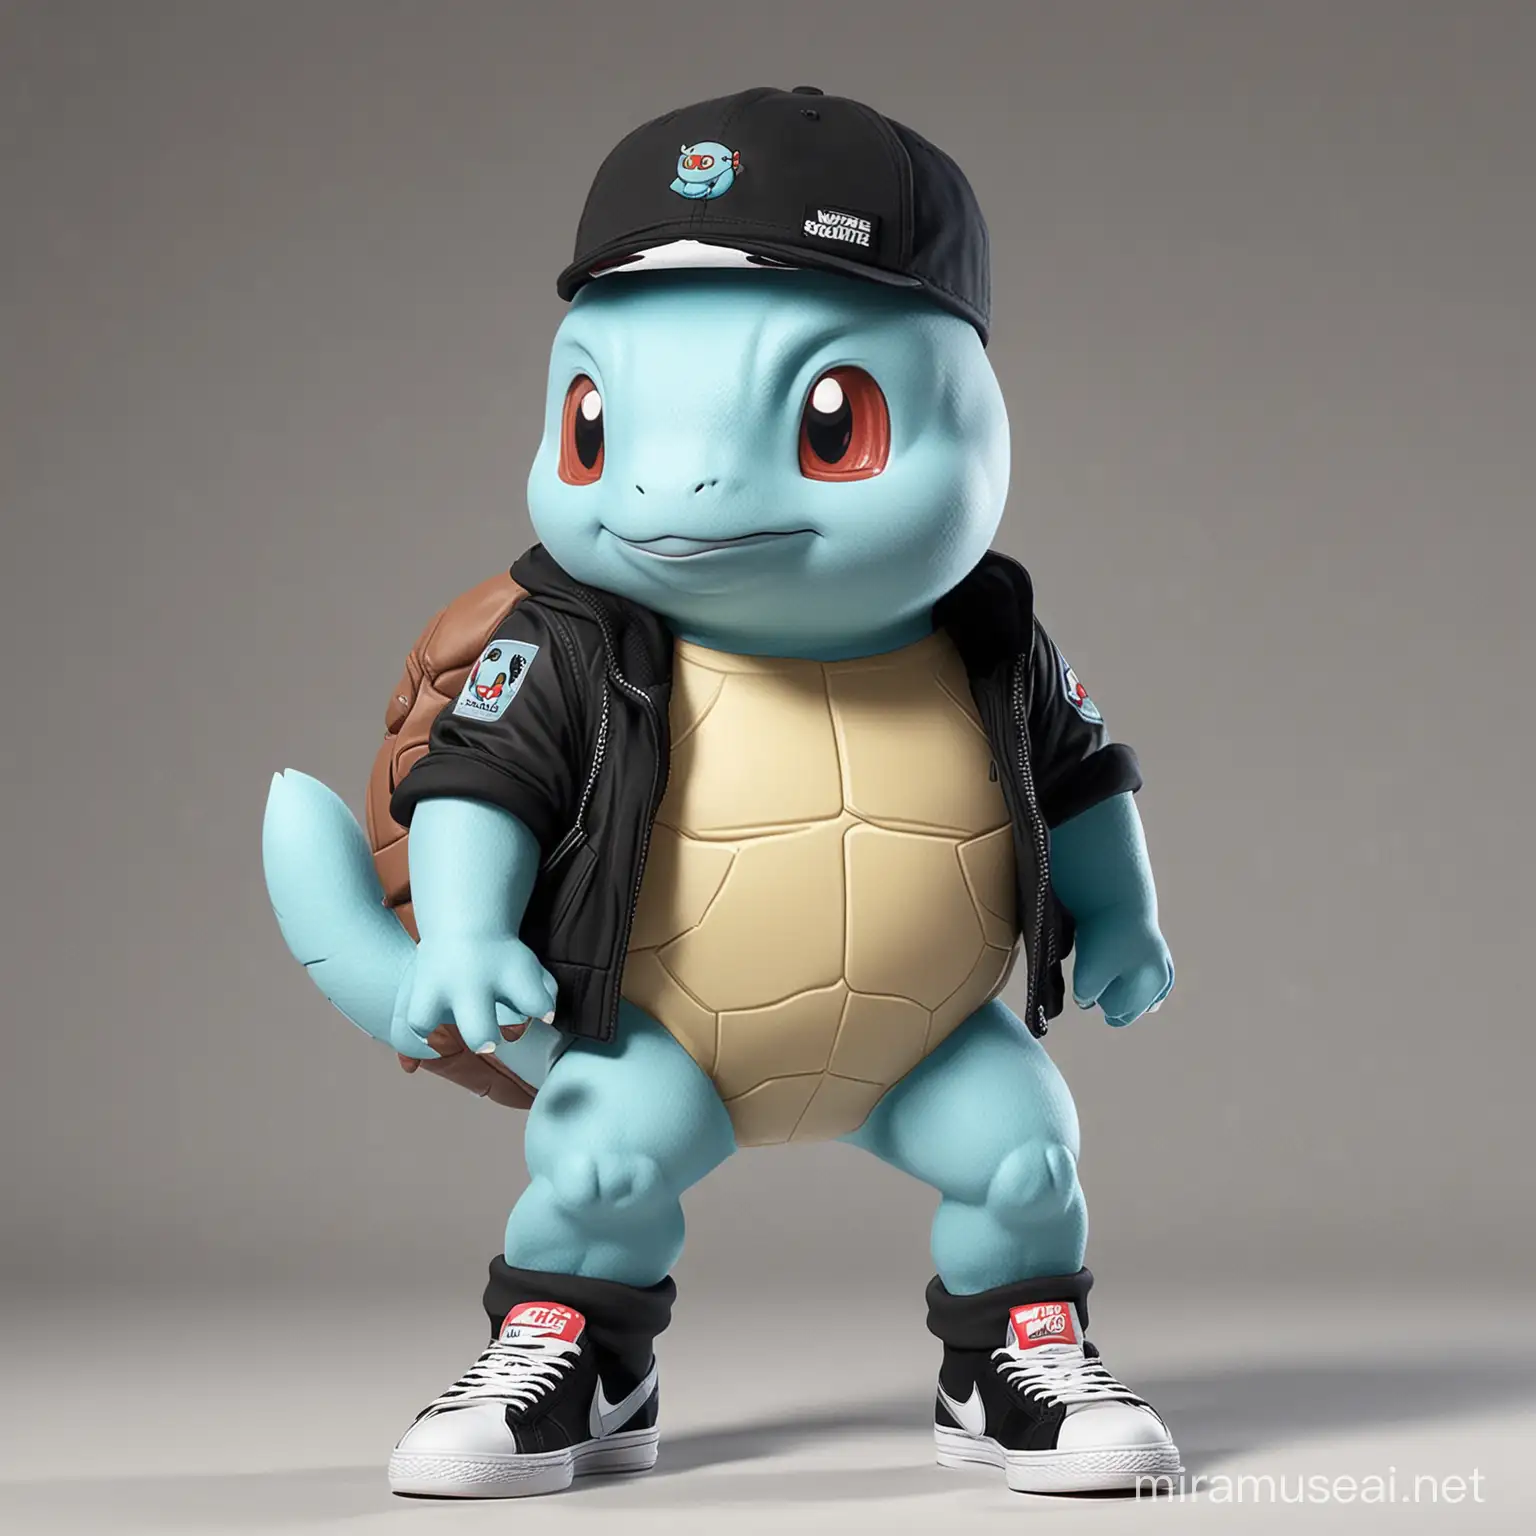 Cool Squirtle in Stylish Jock Jacket Black Caps and Nike Shoes